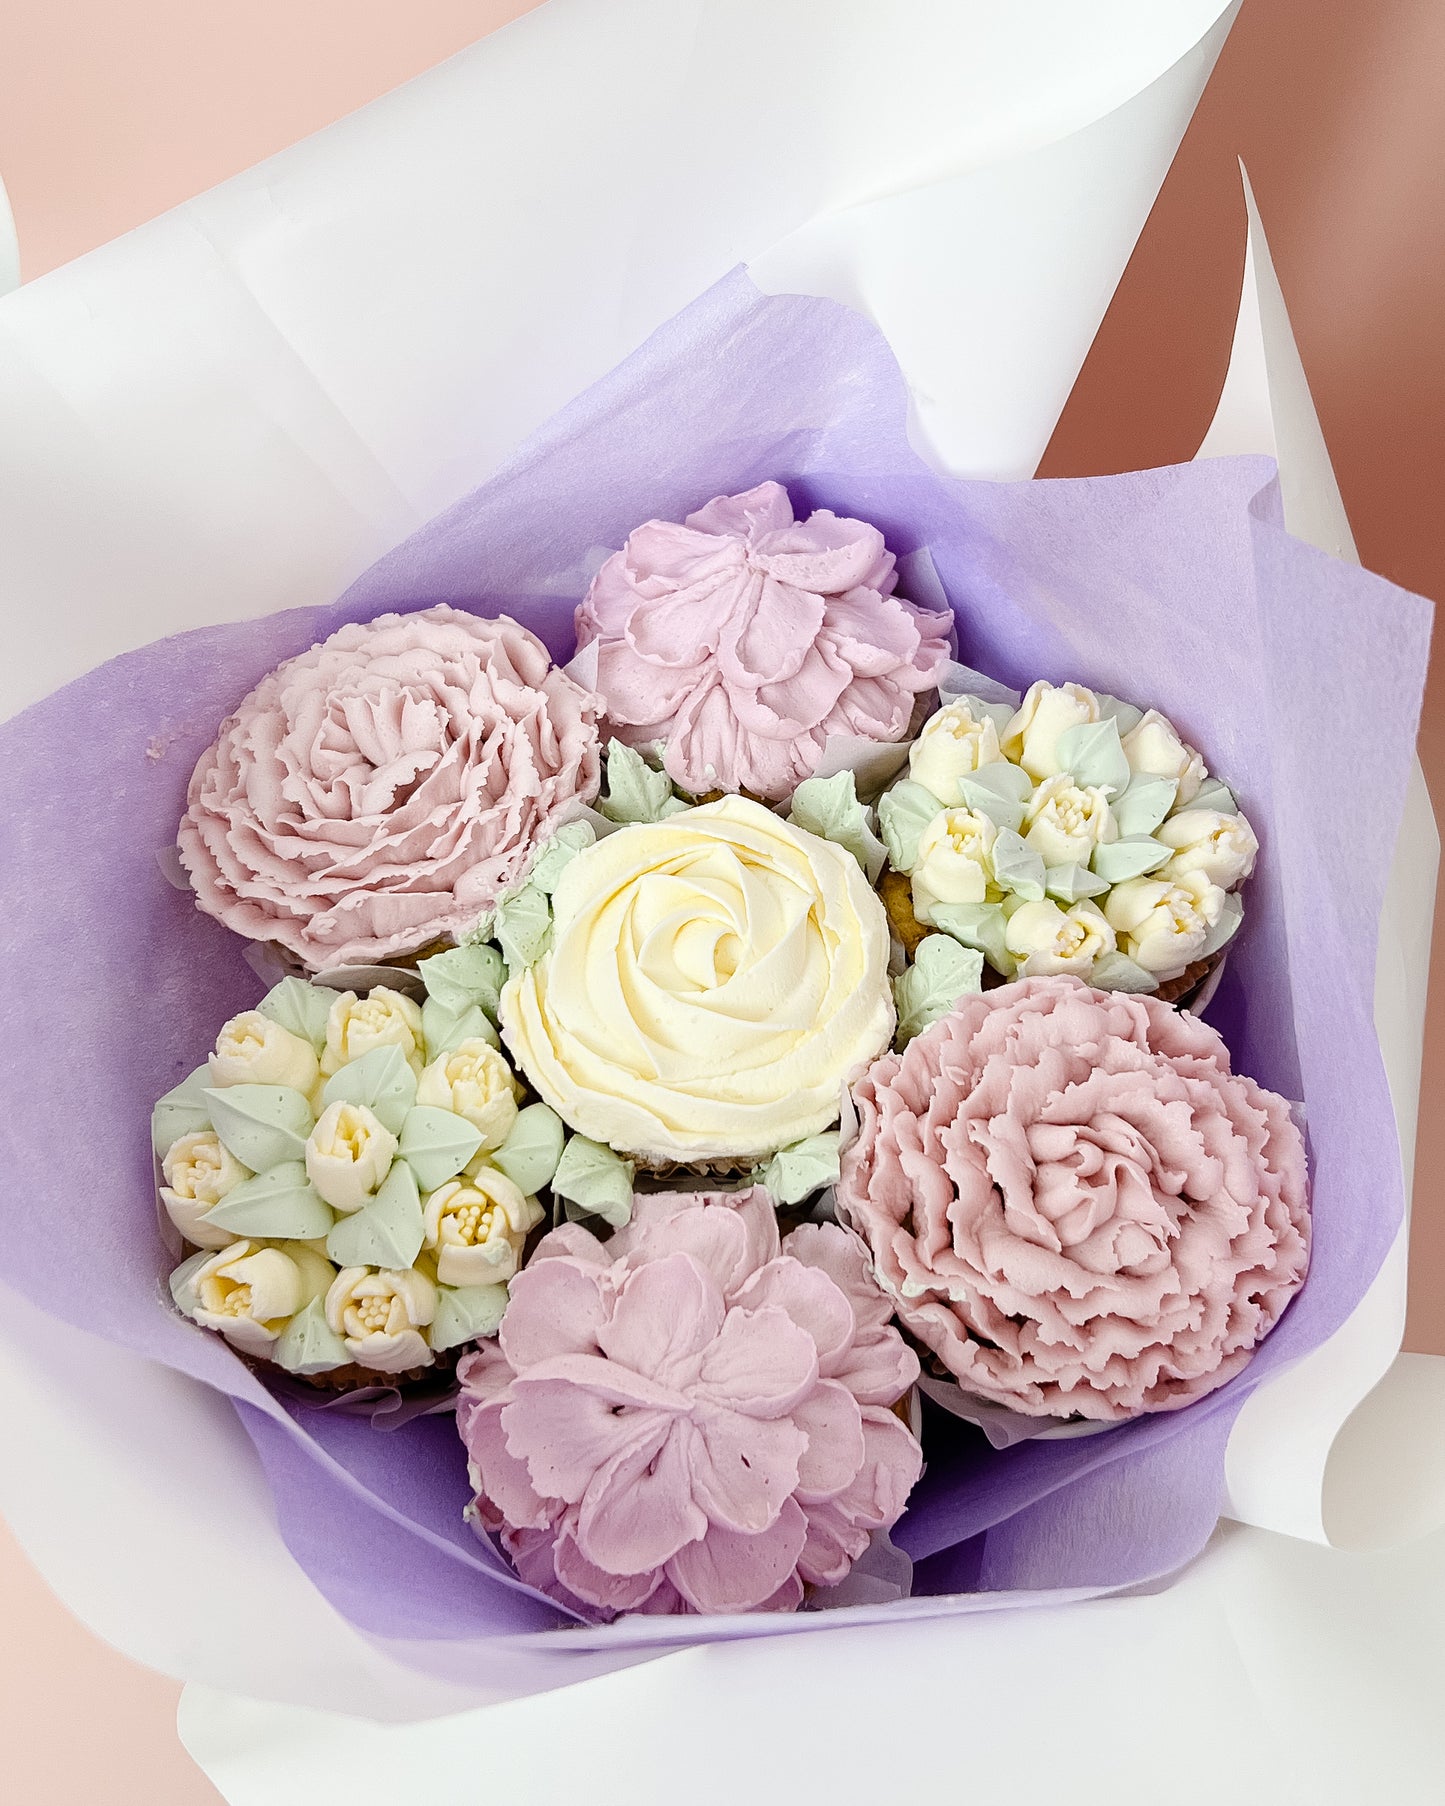 Mothers Day edible bouquet